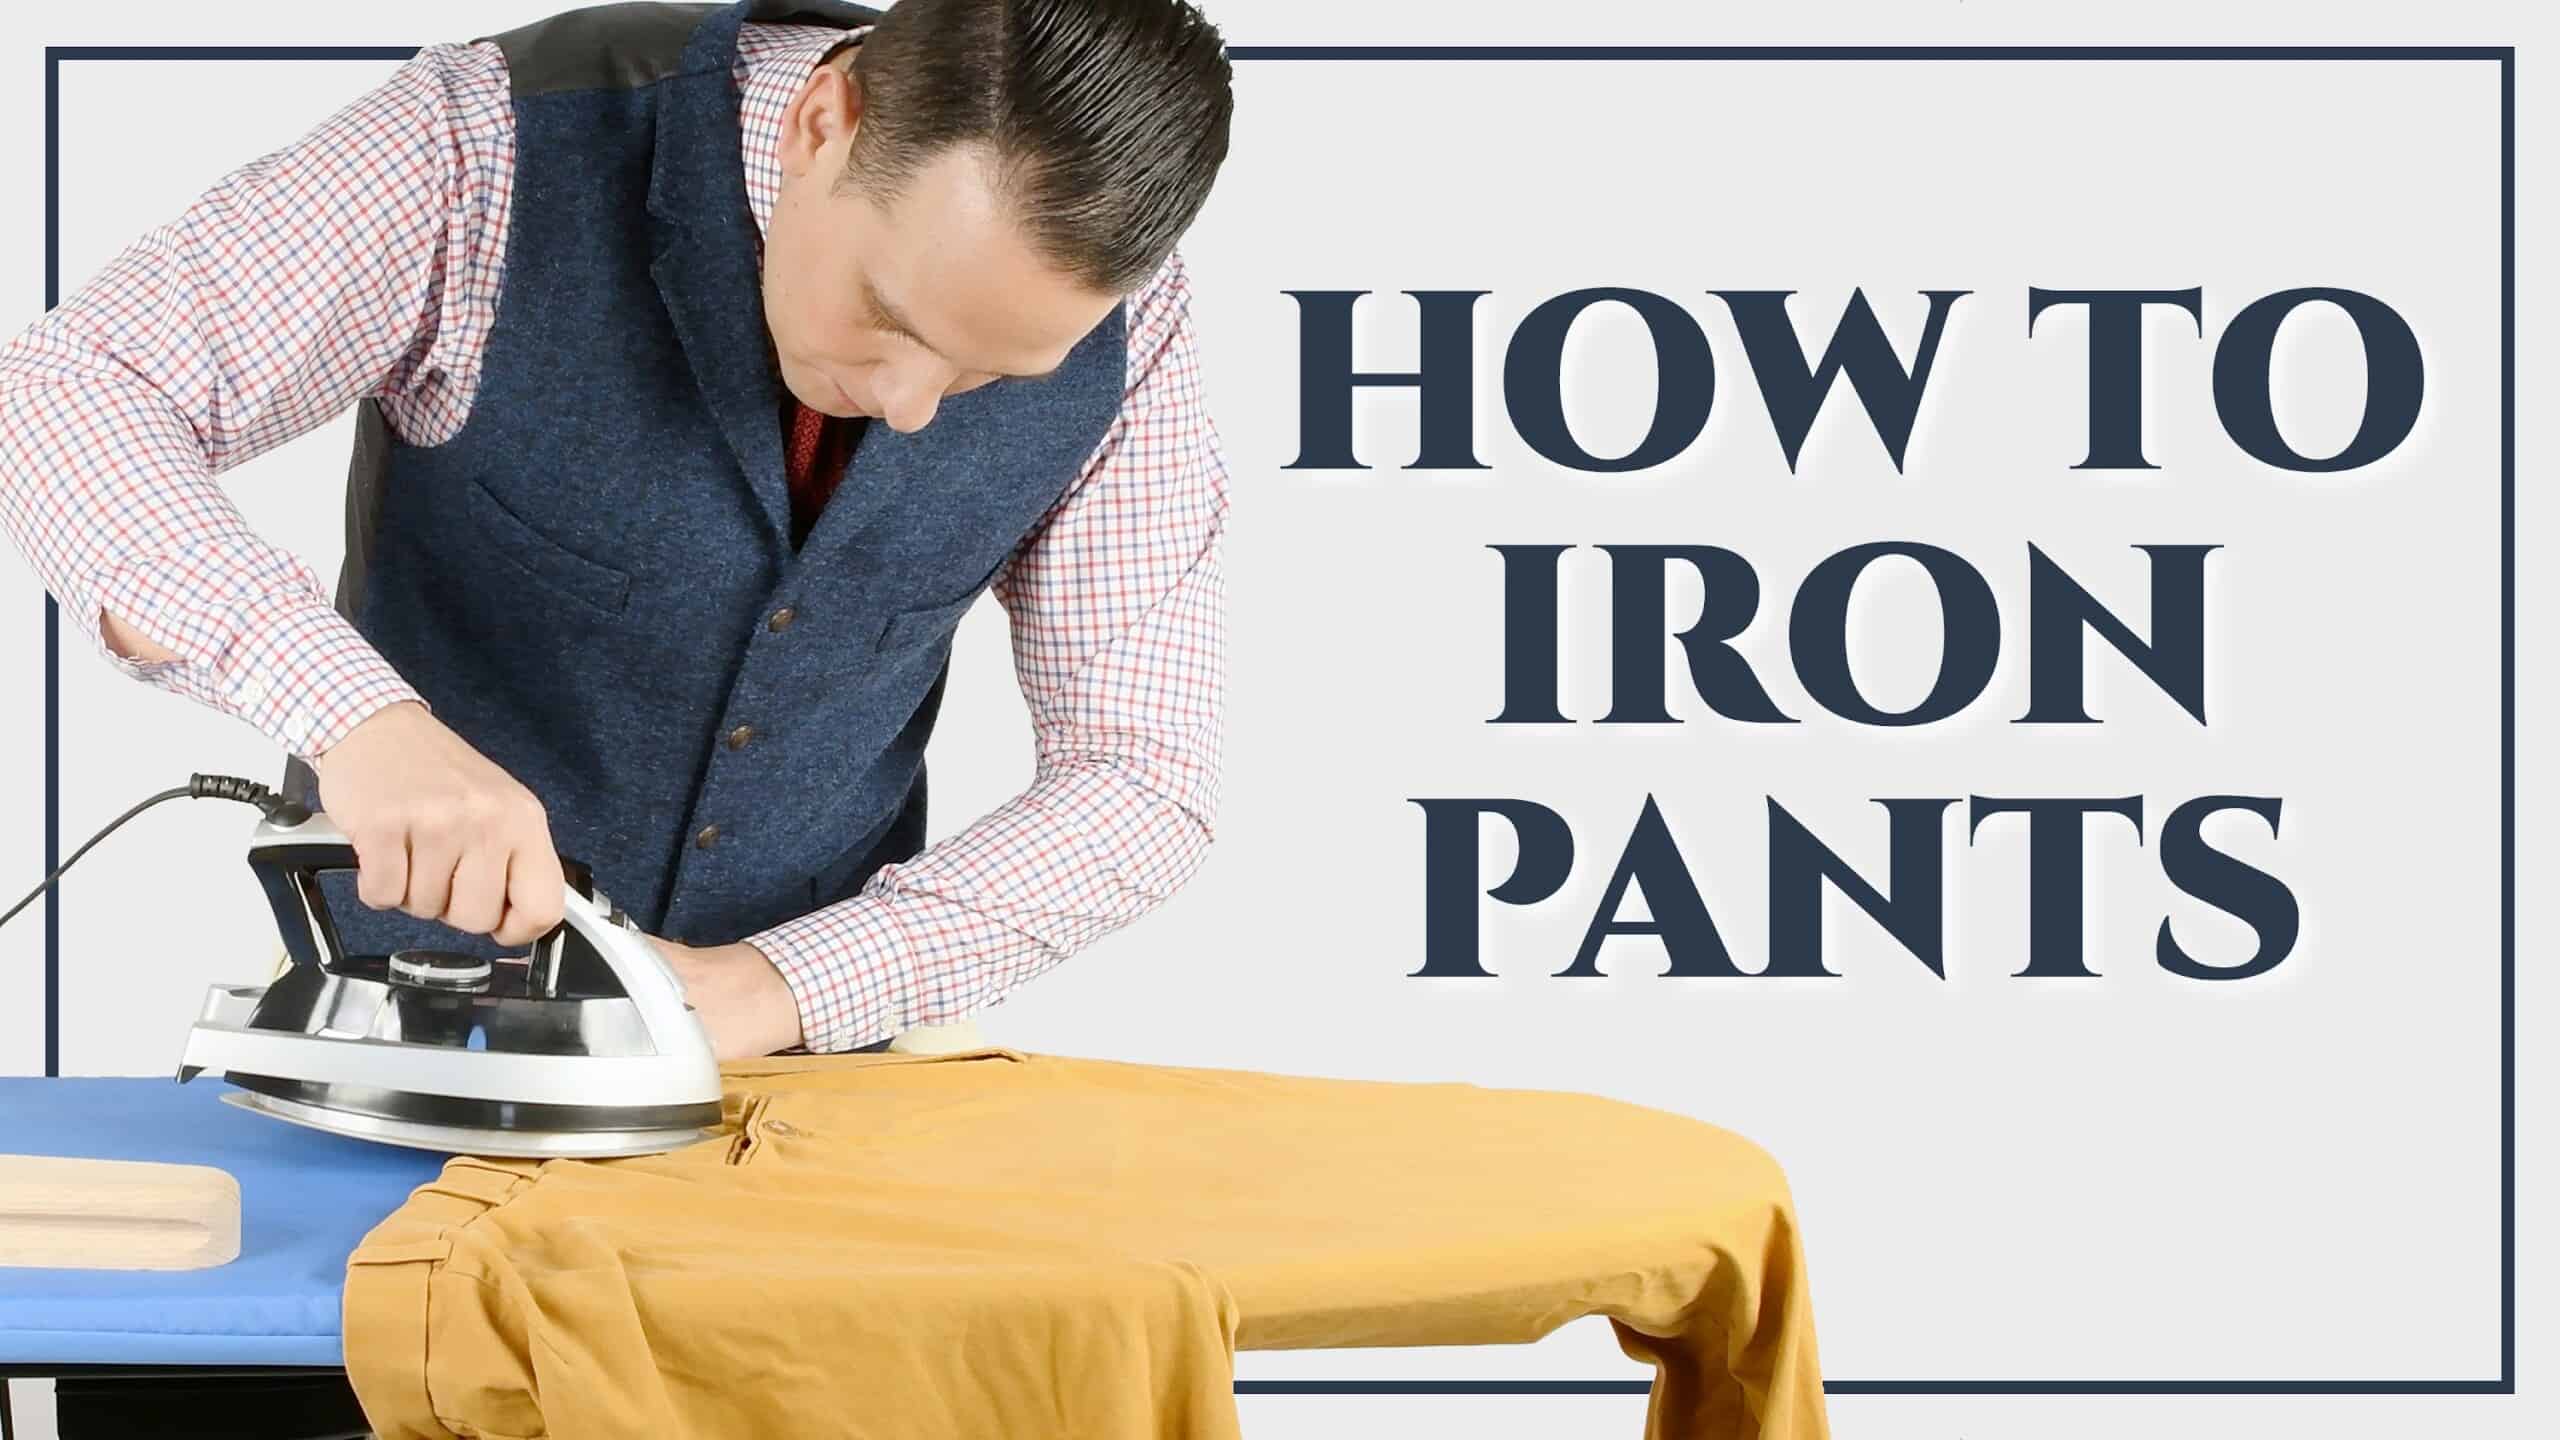 How To Iron Dress Pants - Part III The Complete Guide To Ironing